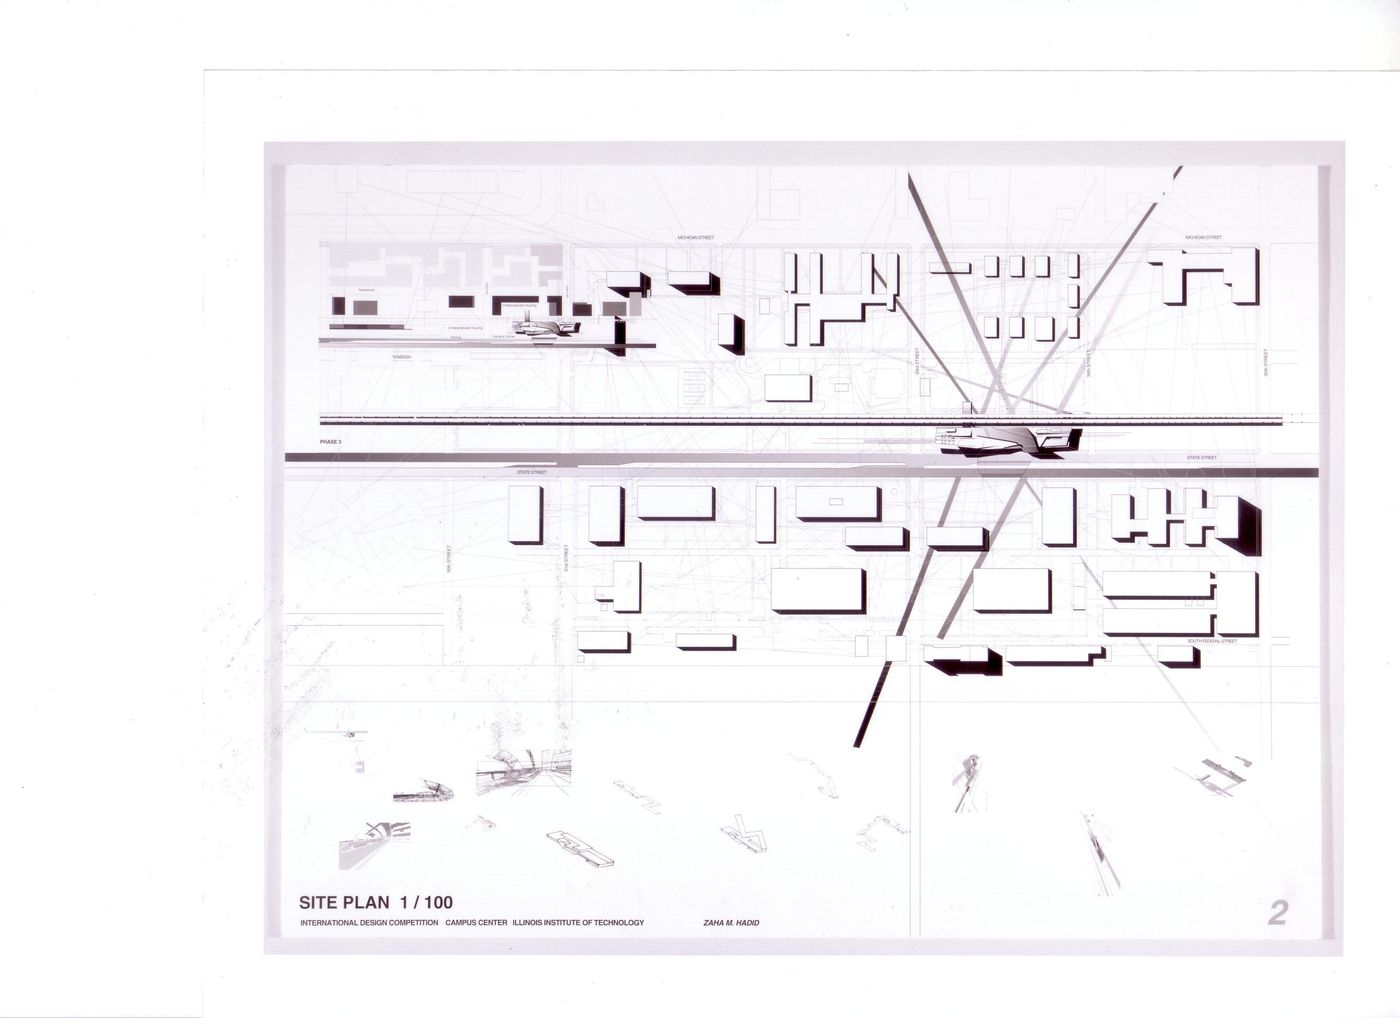 Axonometric view of site, submission to the Richard H. Driehaus Foundation International Design Competition for a new campus center (1997-98), Illinois Institute of Technology, Chicago, Illinois